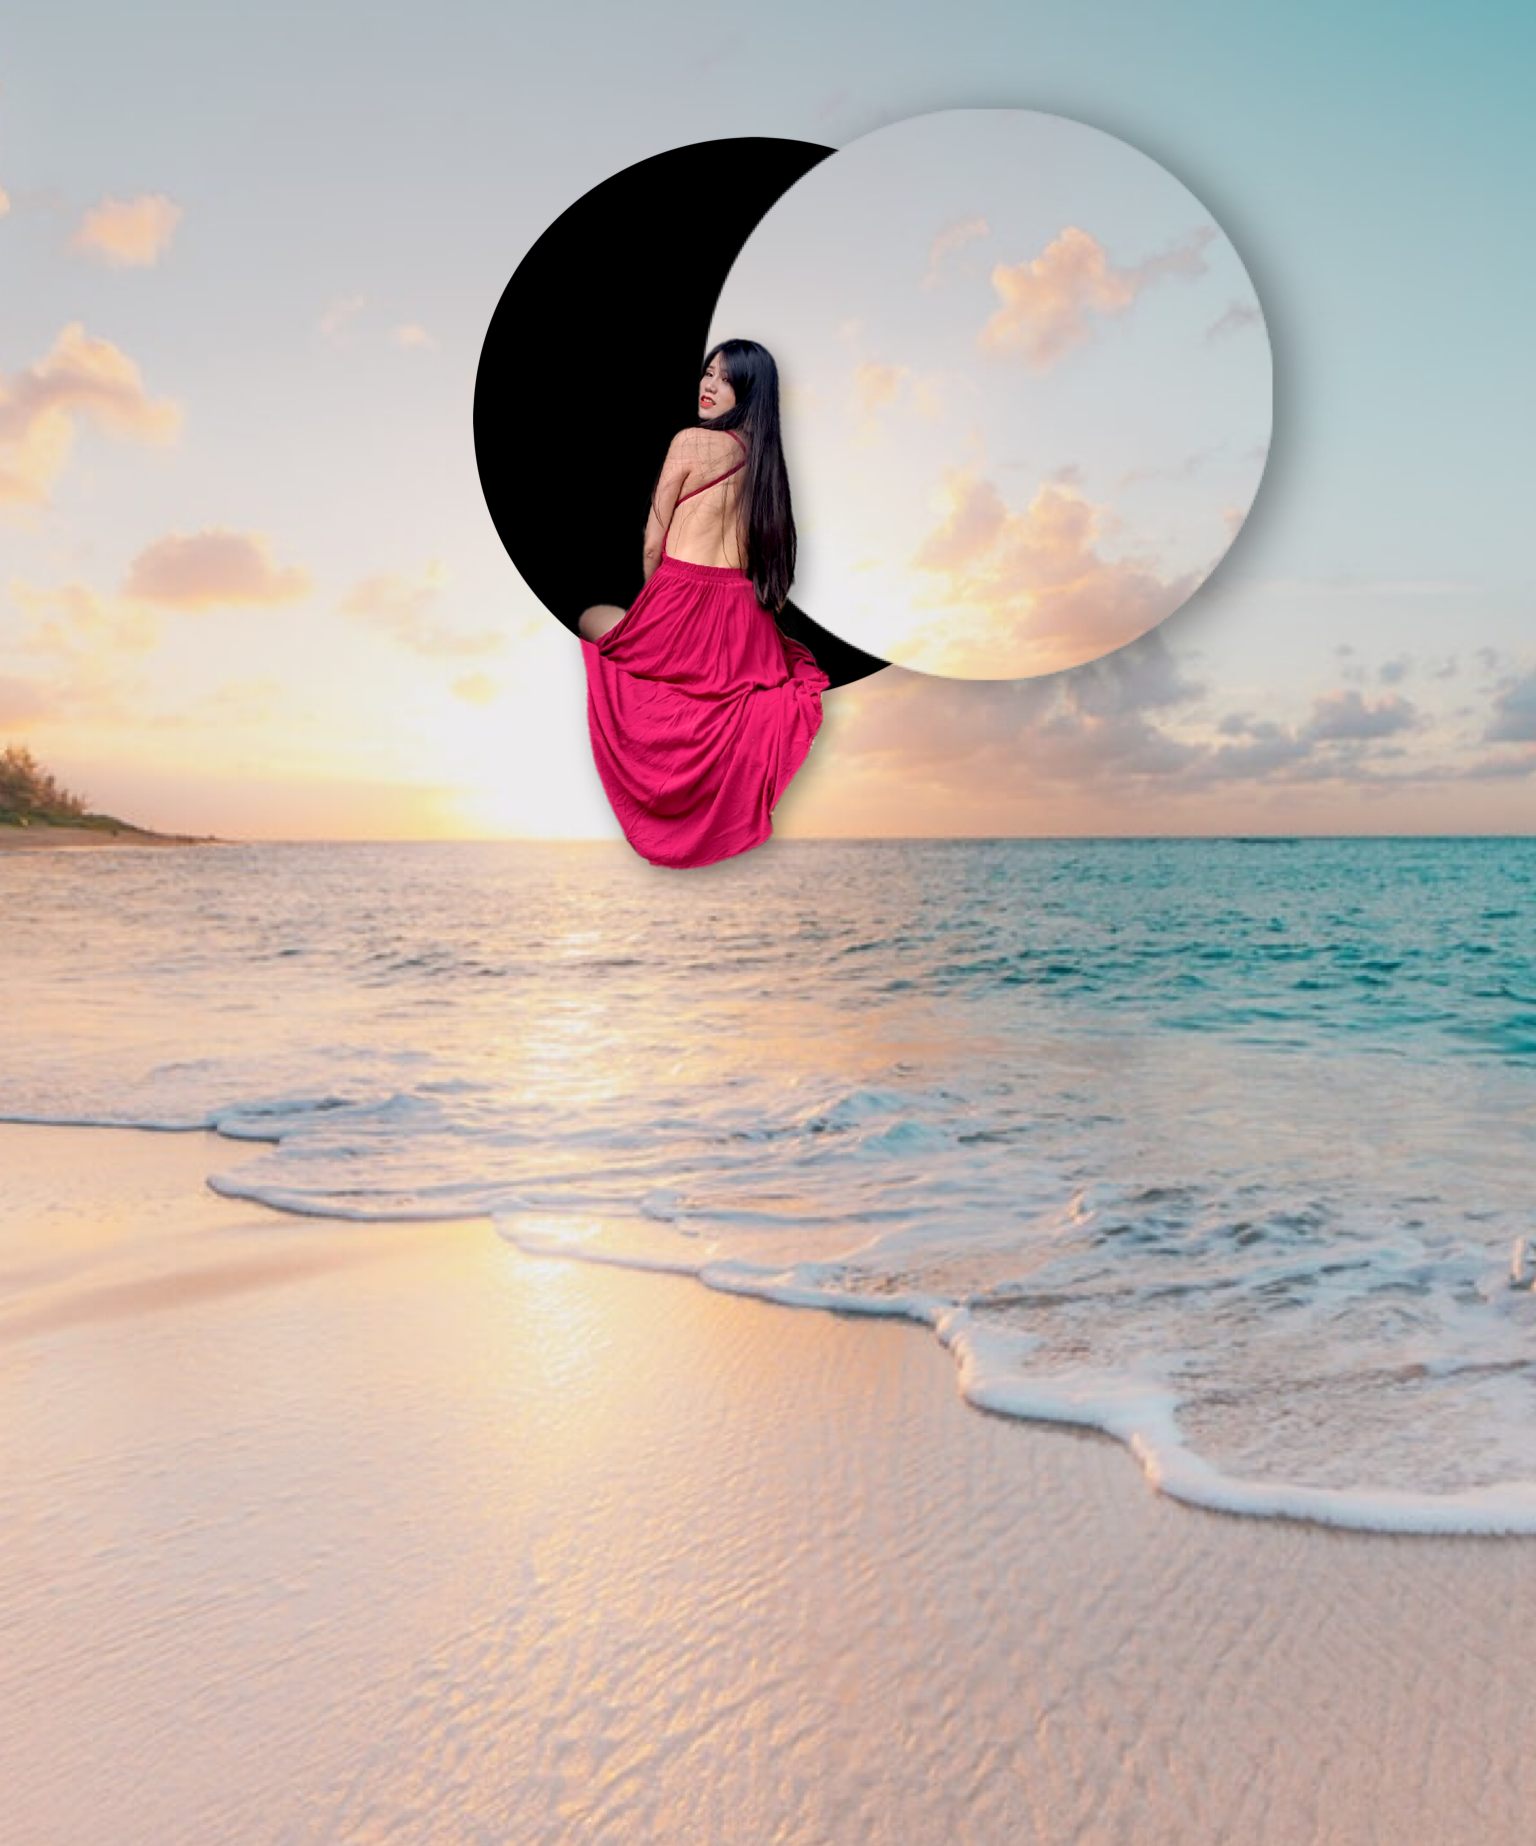 A Woman In A Pink Dress Standing On A Beach Collage Art Template